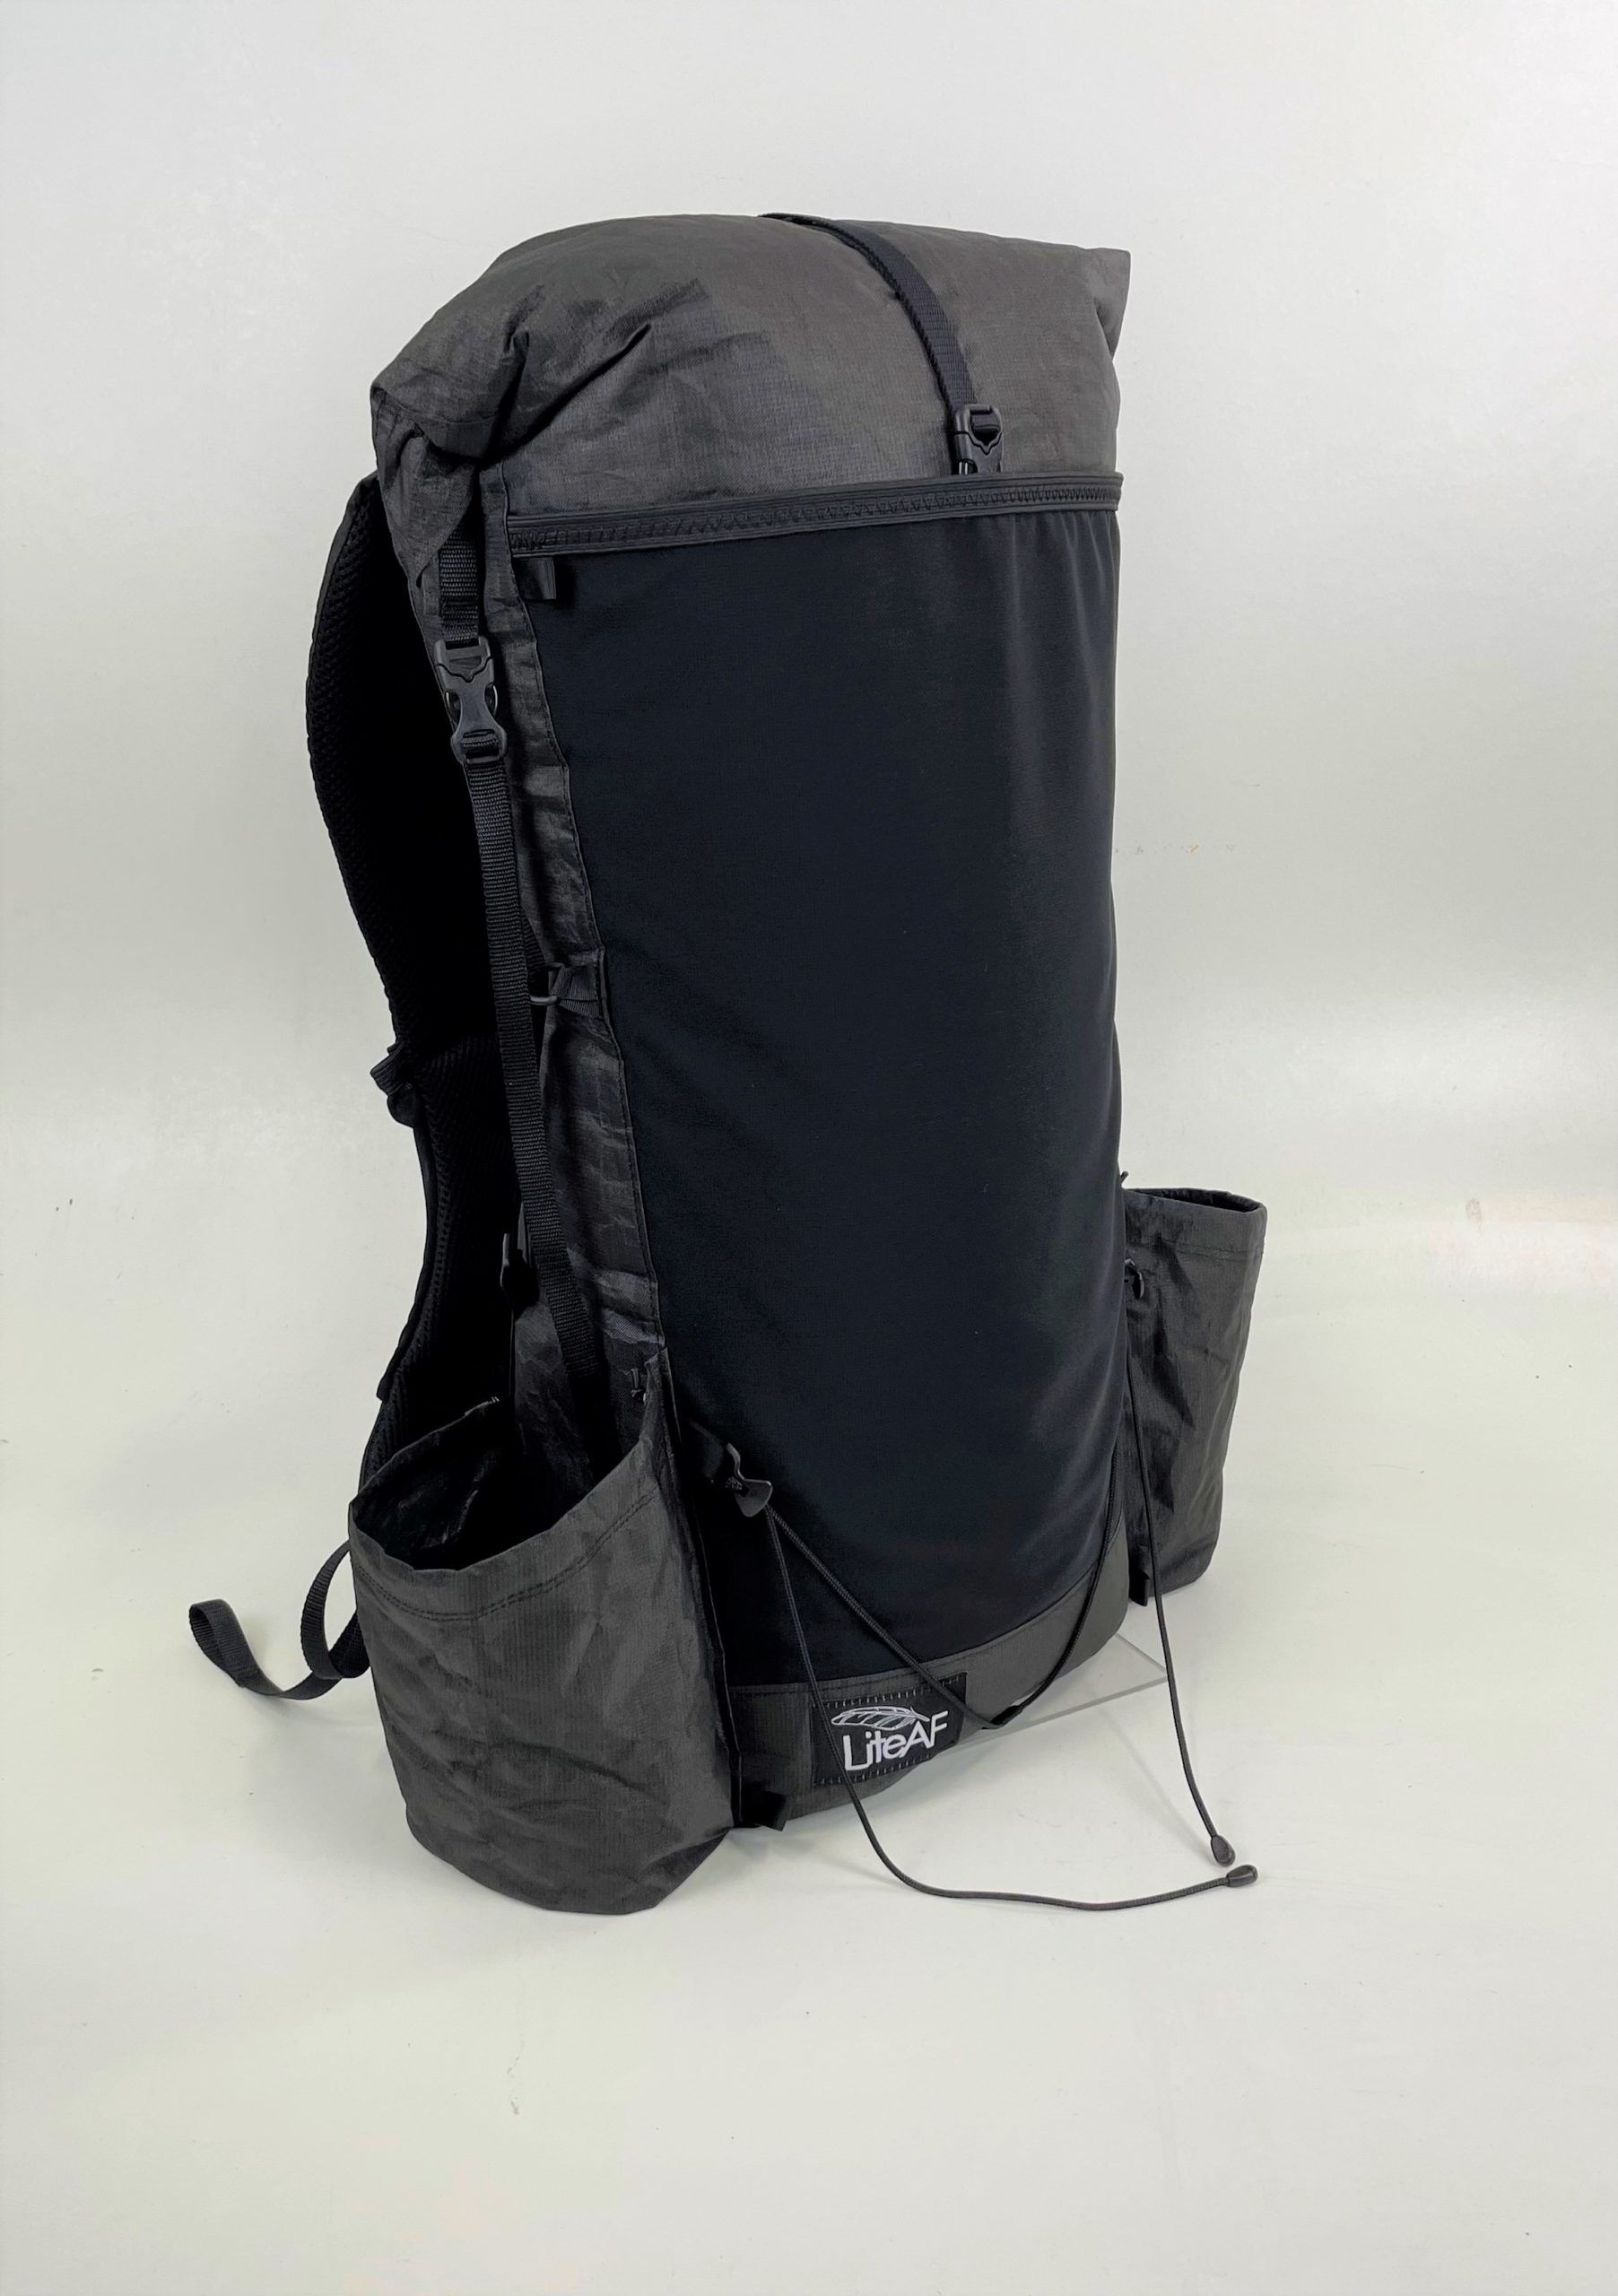 LiteAF Ultra 20L Curve, the next upgrade on the pathway to hiking ultralight